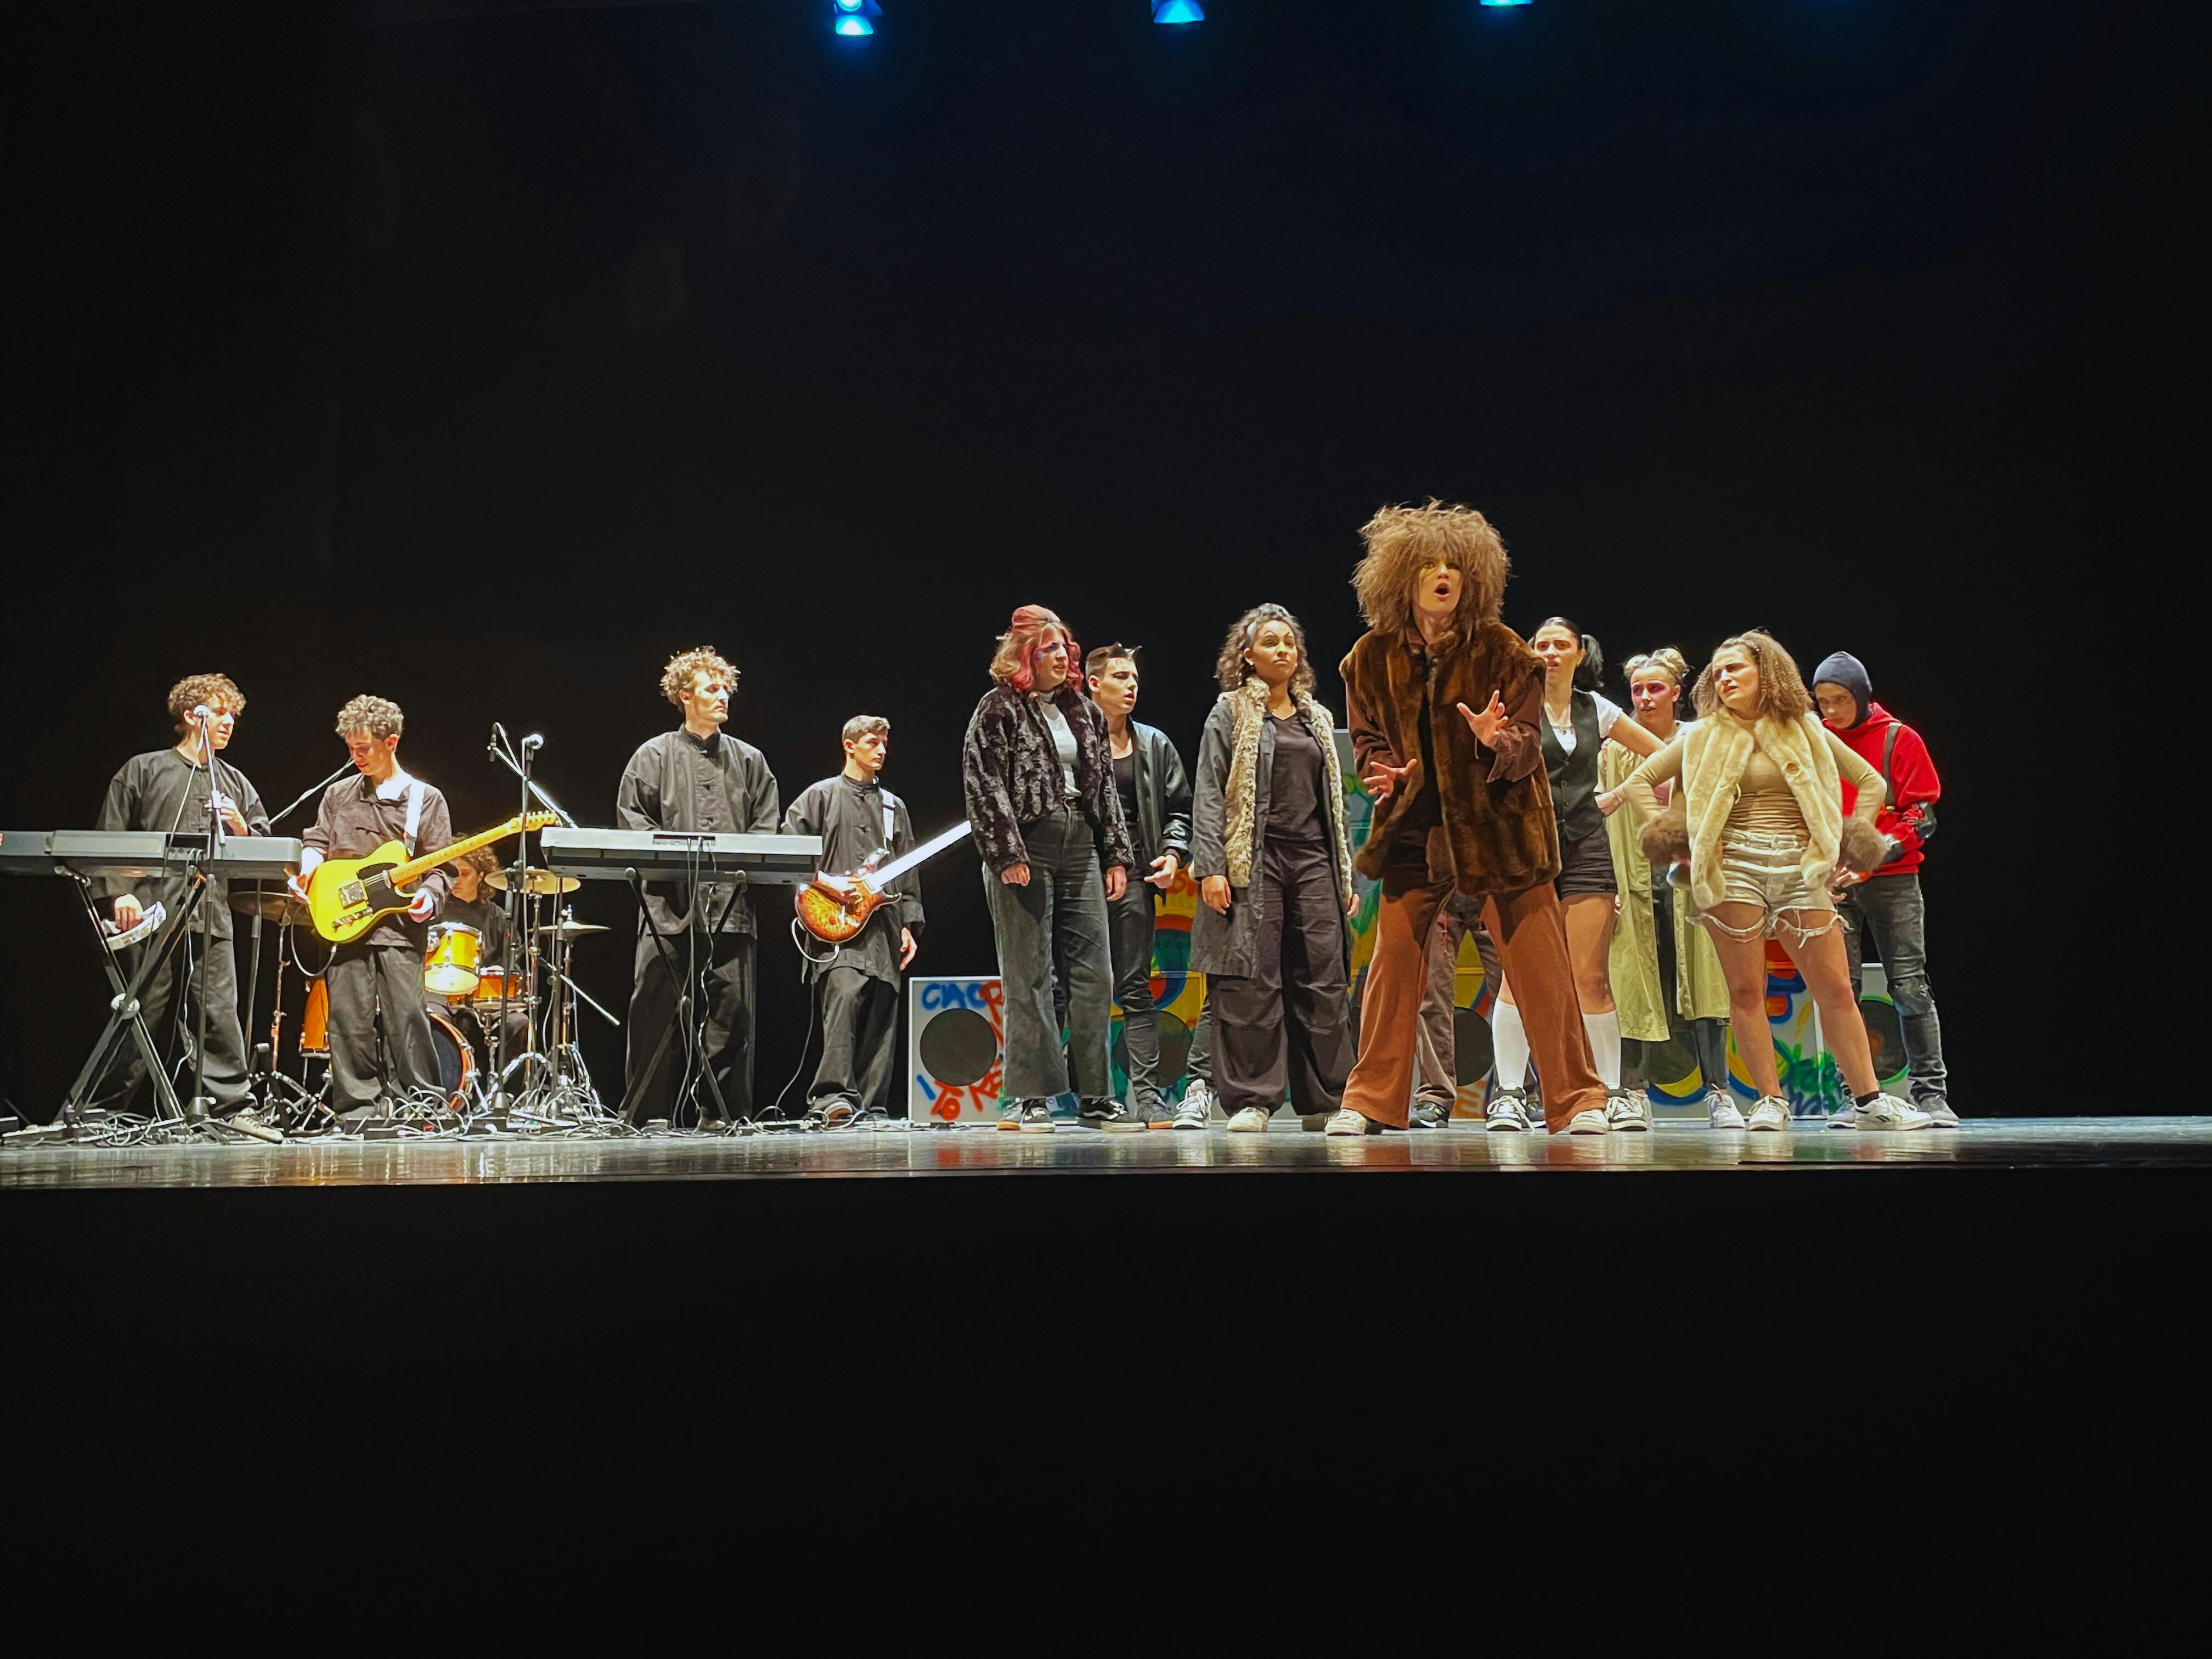 Boys and girls on stage in costumes reminiscent of animals and a band playing